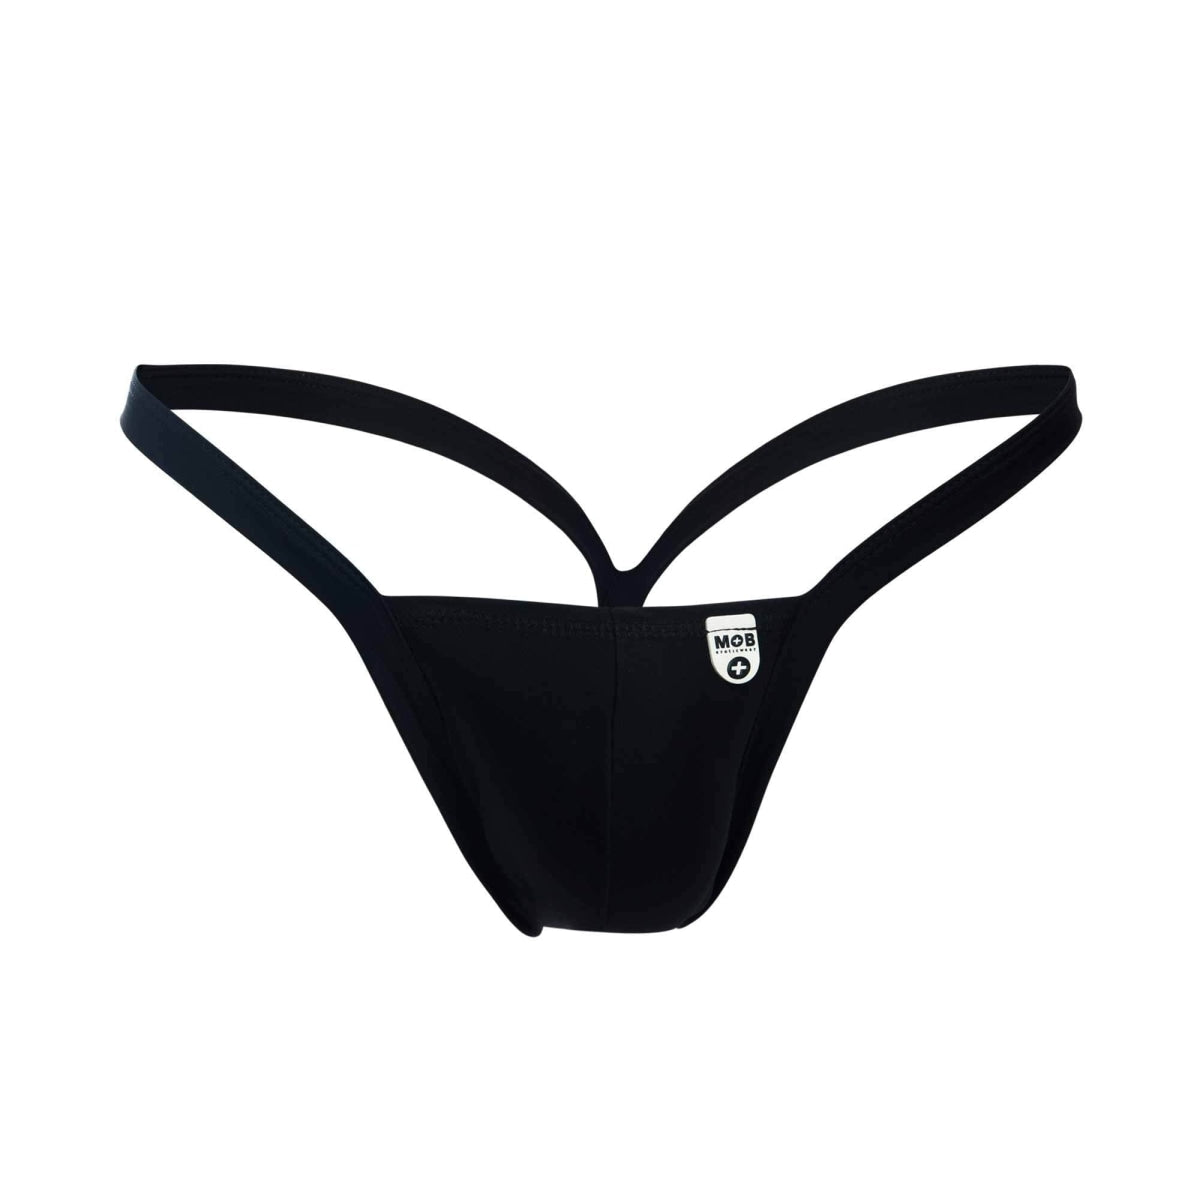 Mob Y Buns Thong Black Small Intimates Adult Boutique